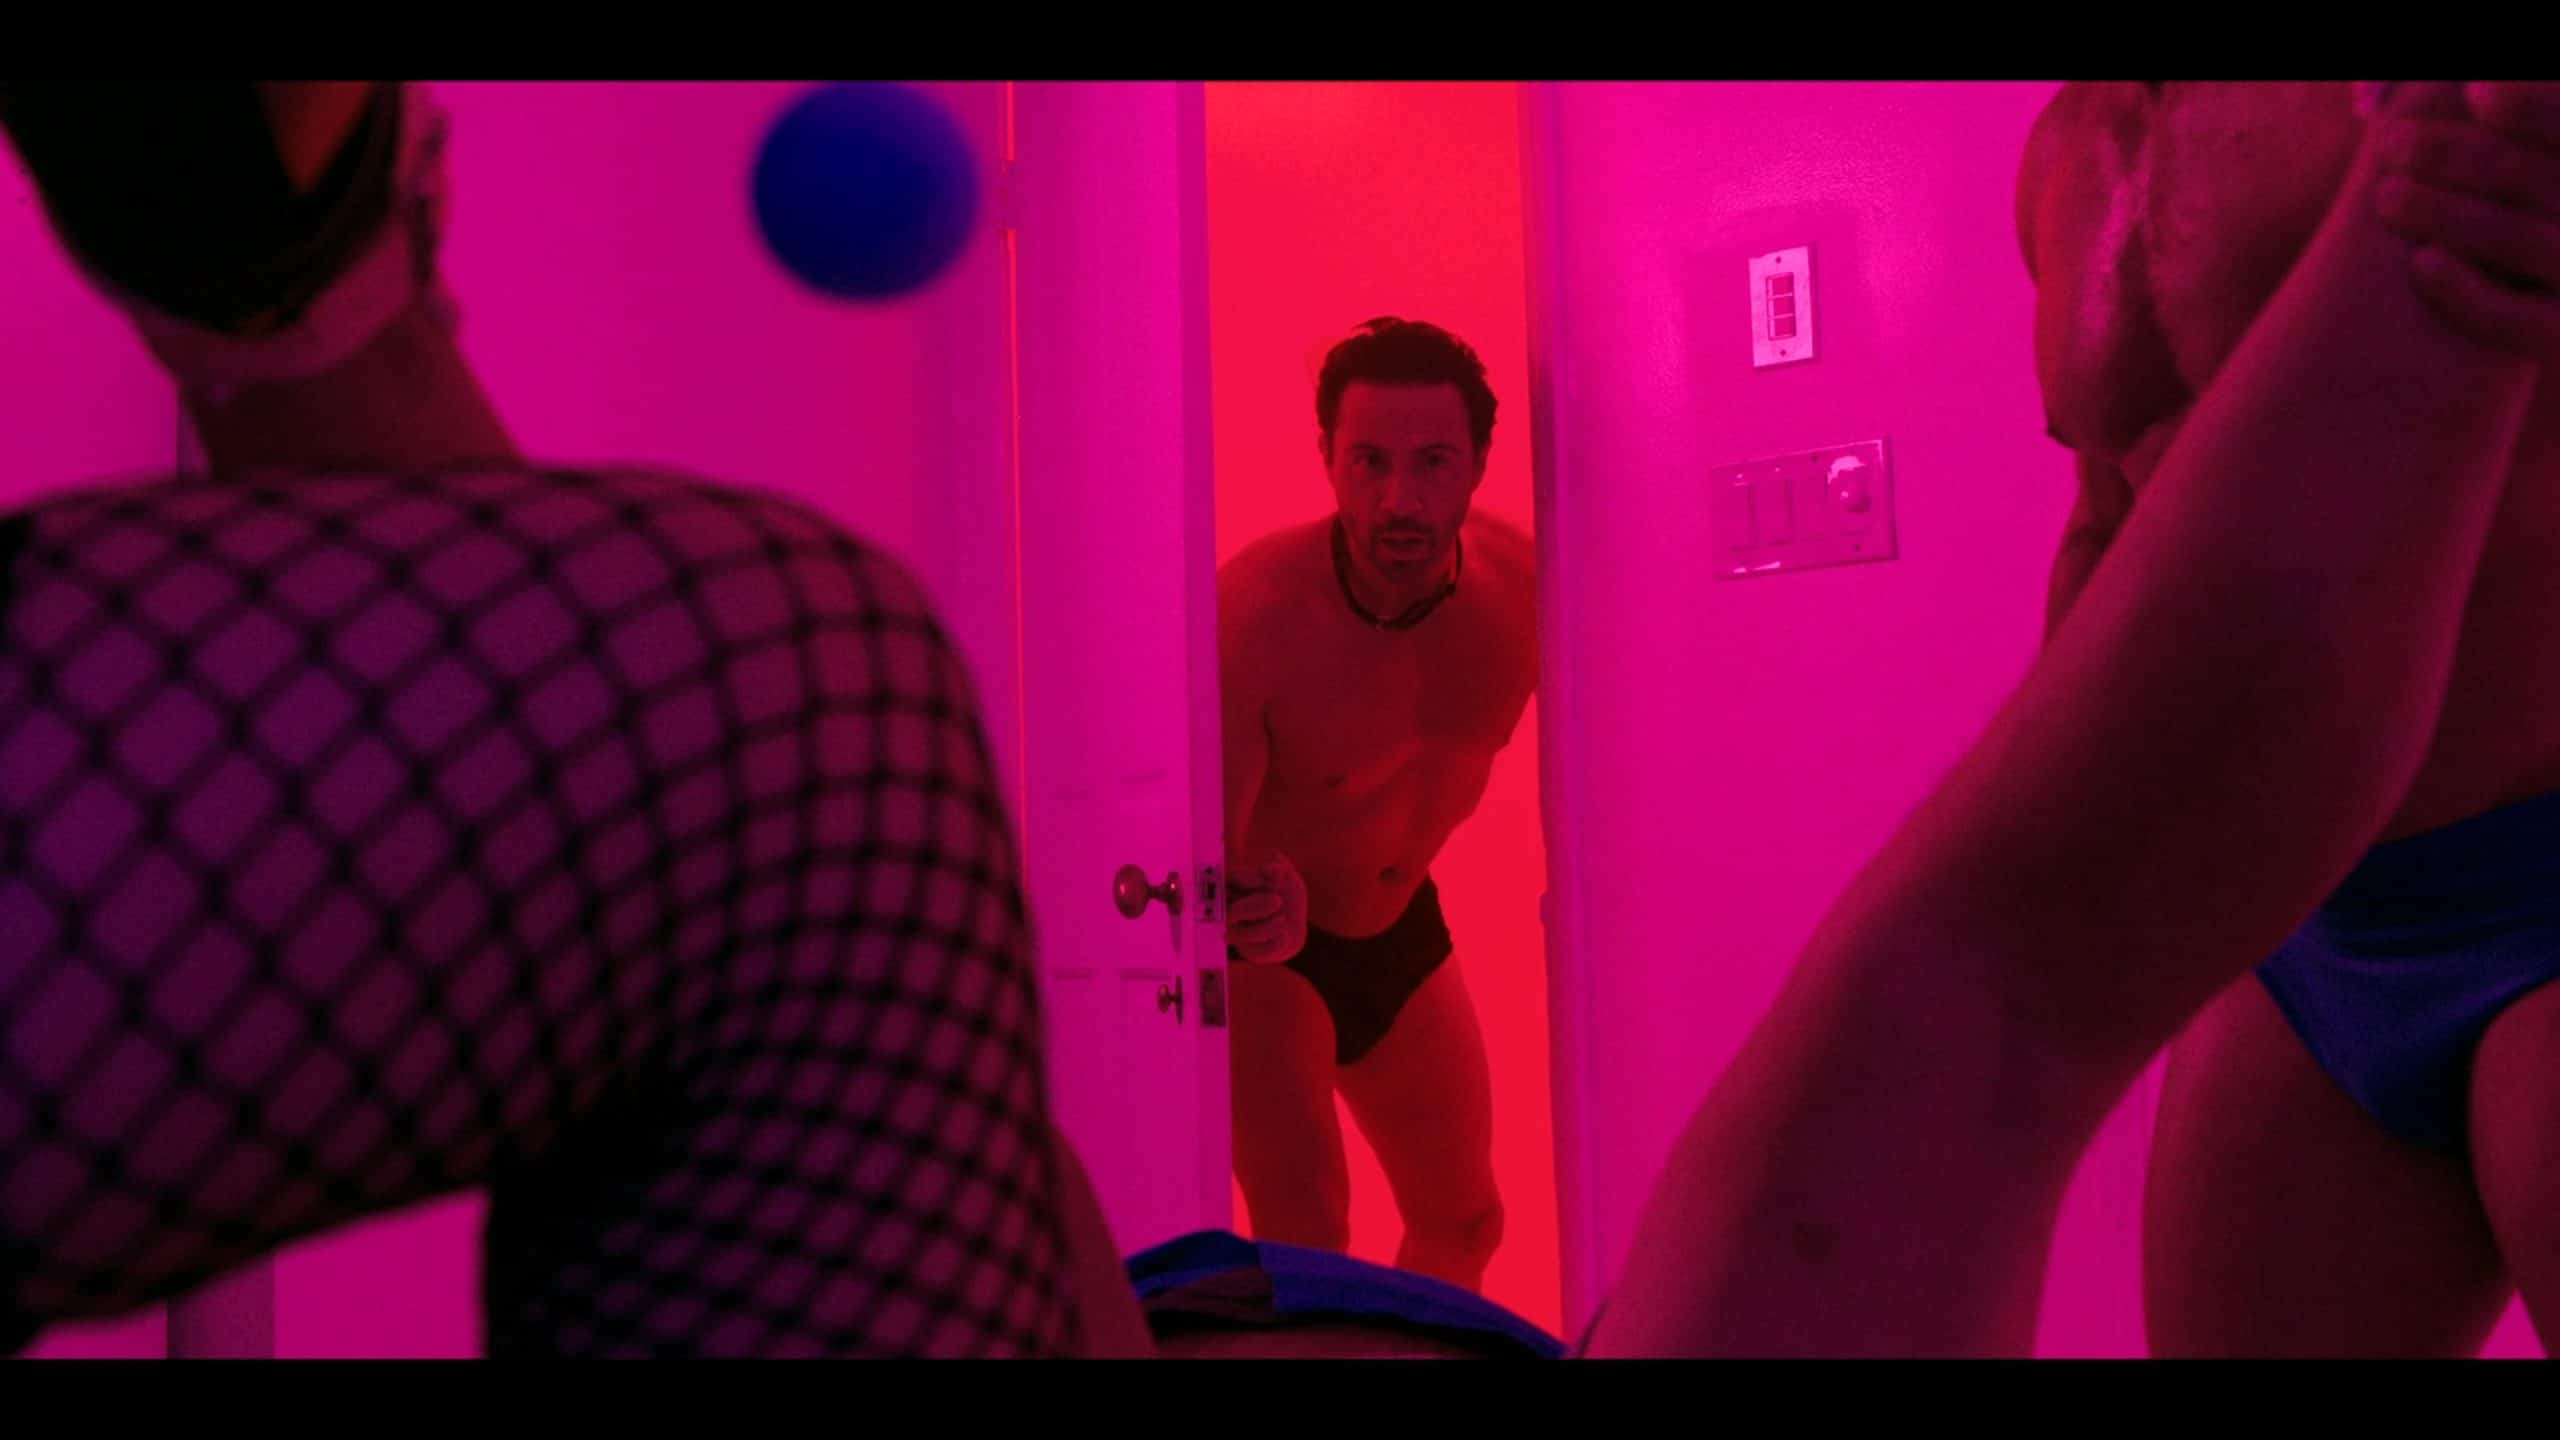 Marco Laguna (Justin Berti) trying to find his friend and leave a BDSM party